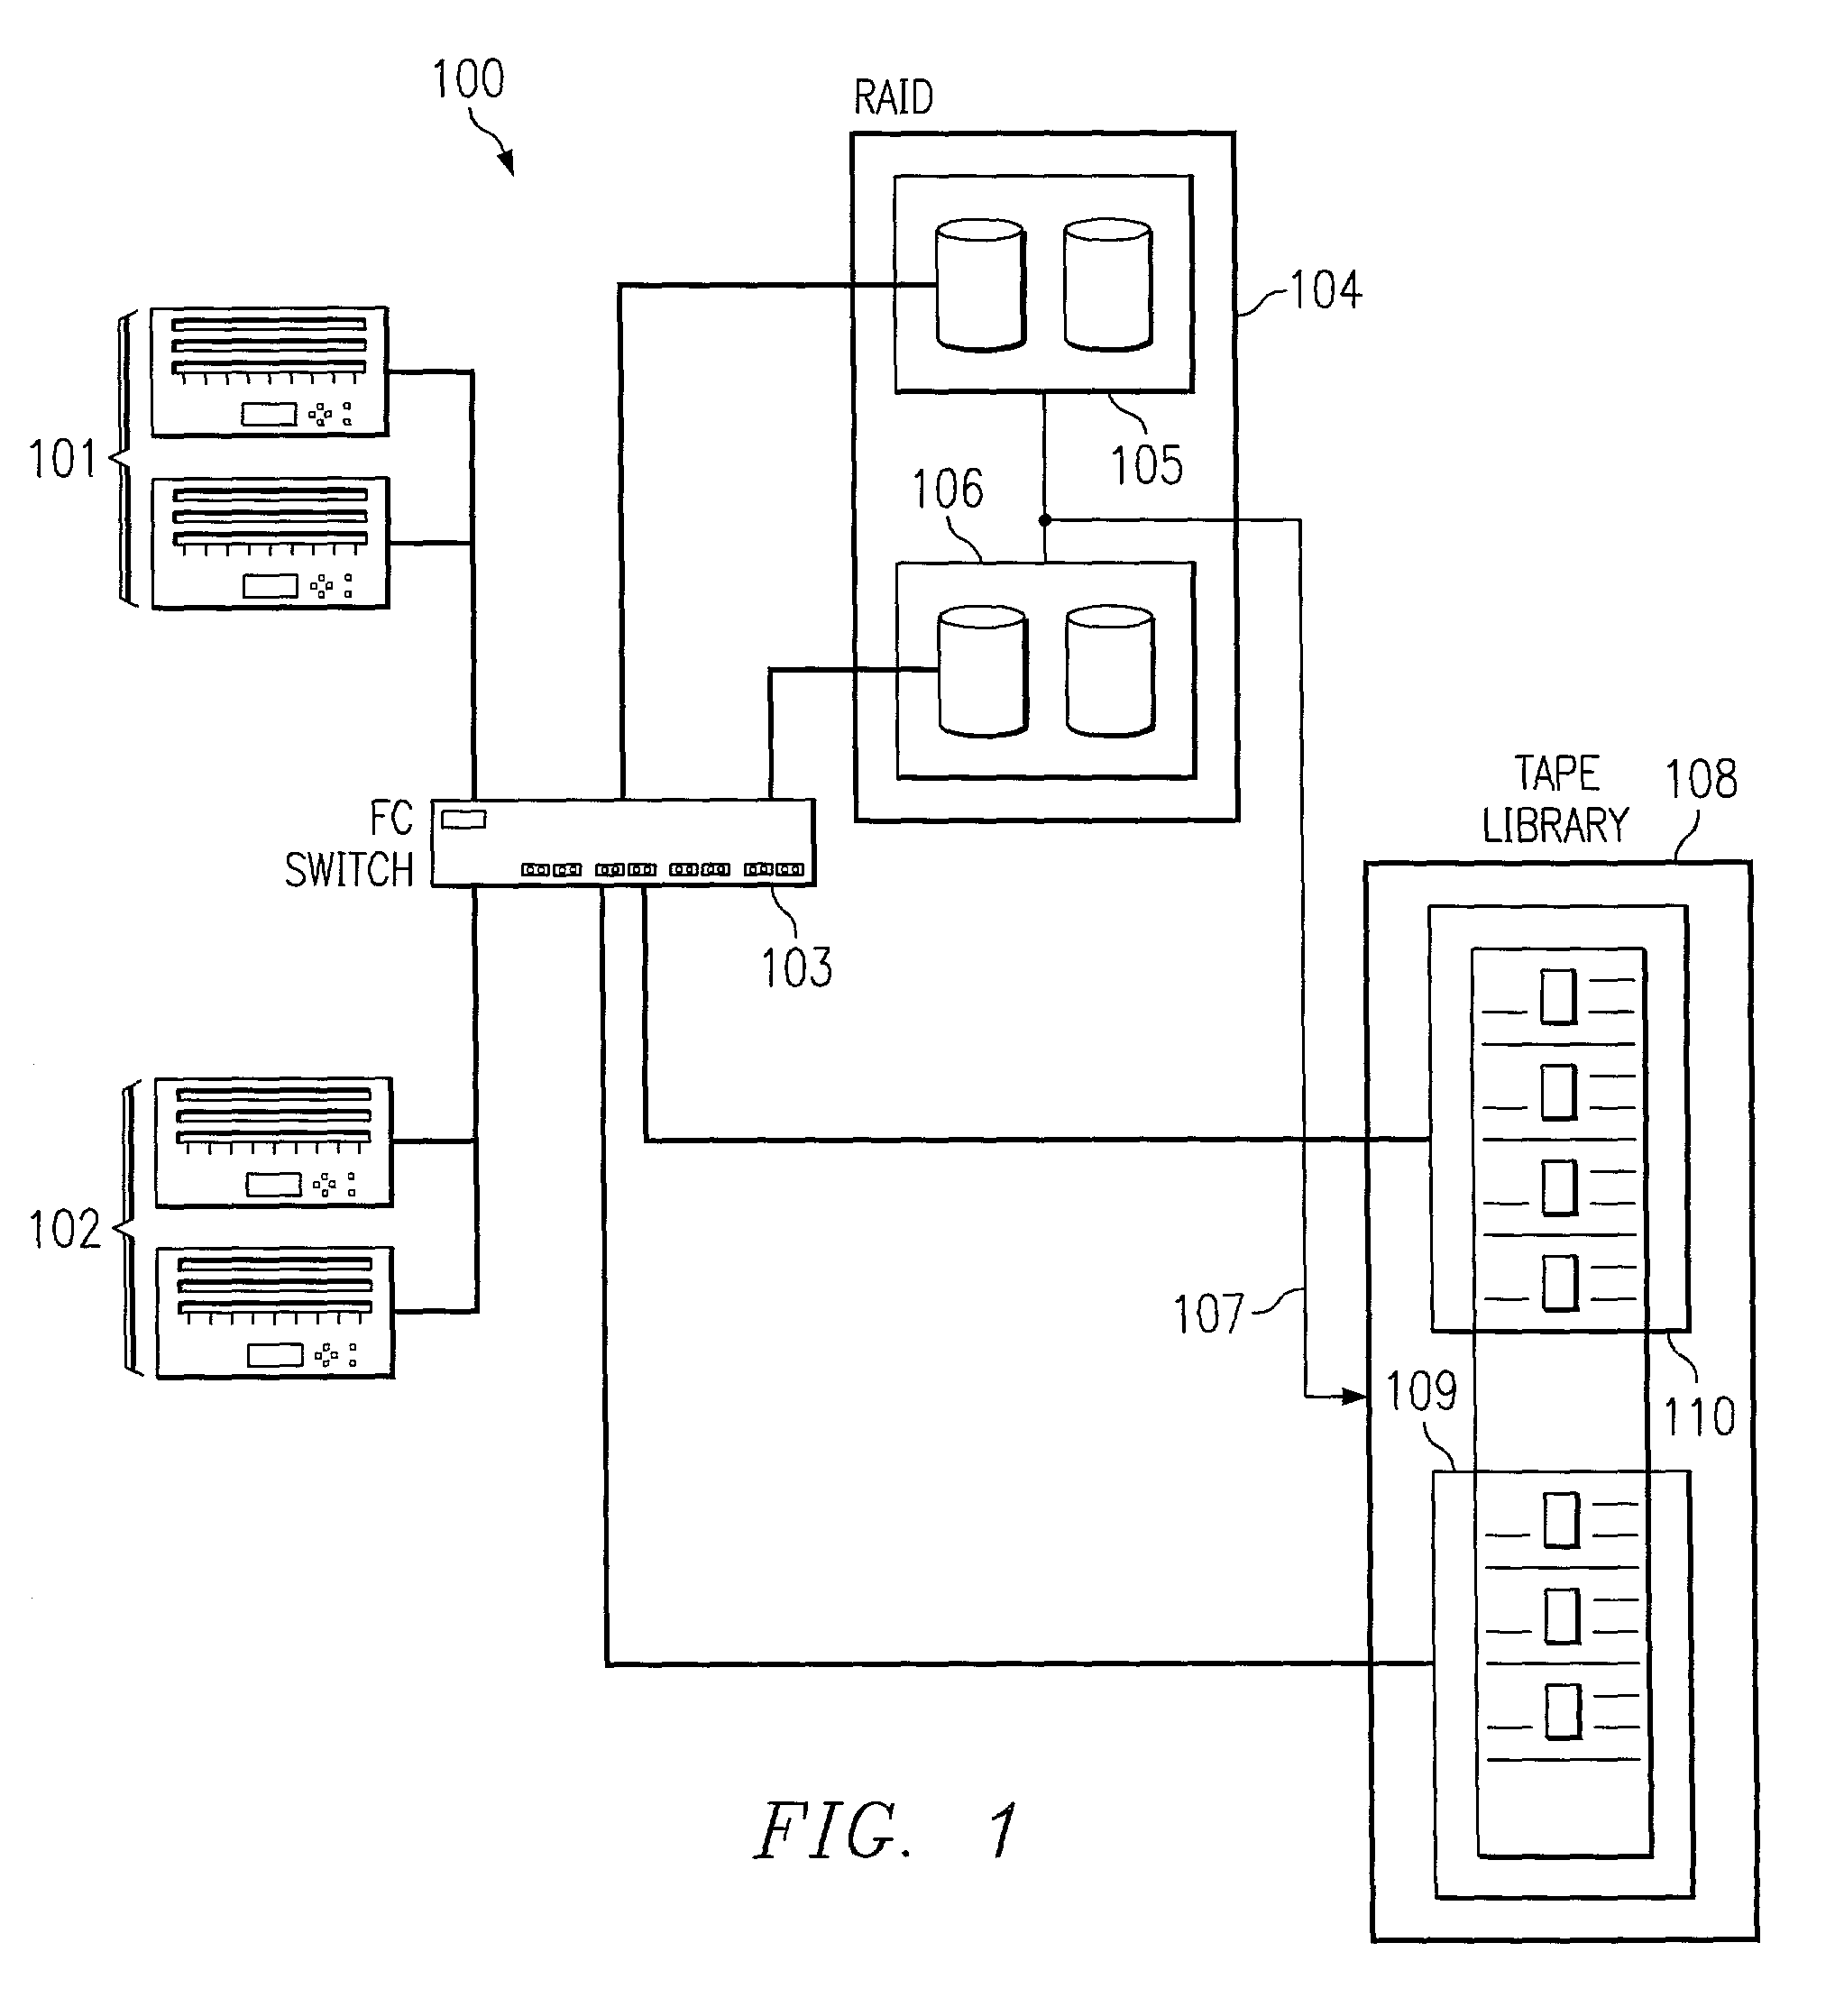 System and method for securing drive access to data storage media based on medium identifiers